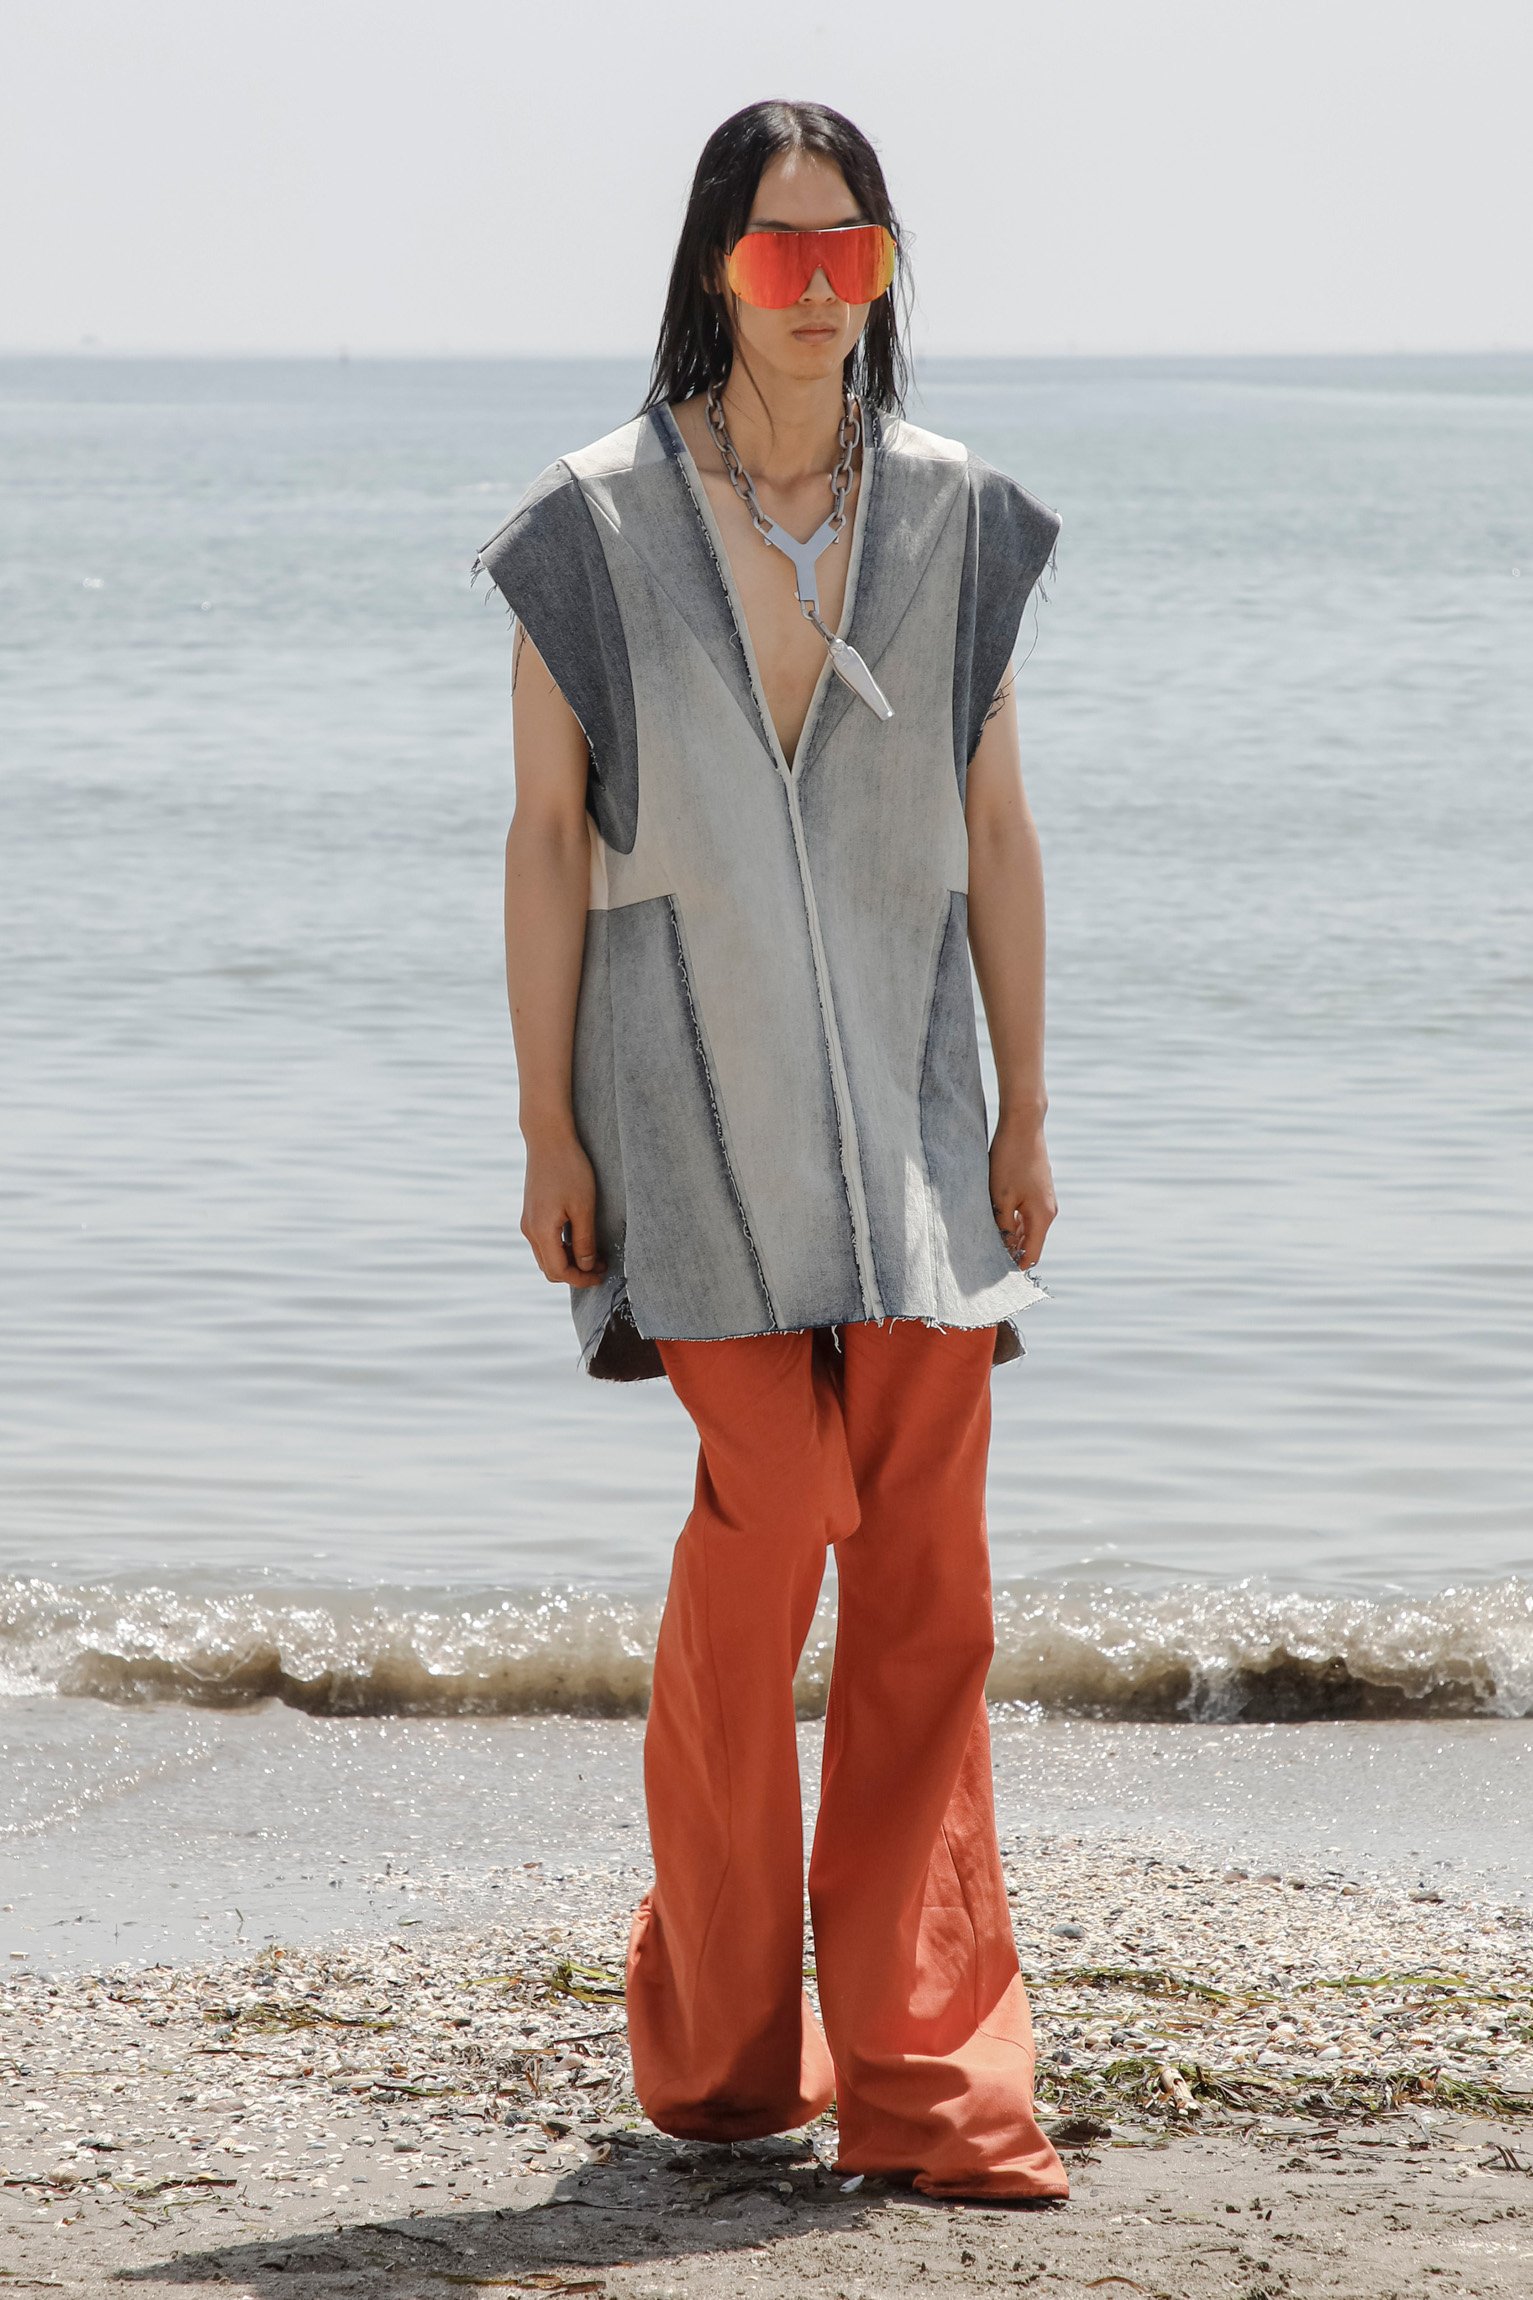 Justsmile Magazine - Rick Owens Lets the Fog Roll in for SS22